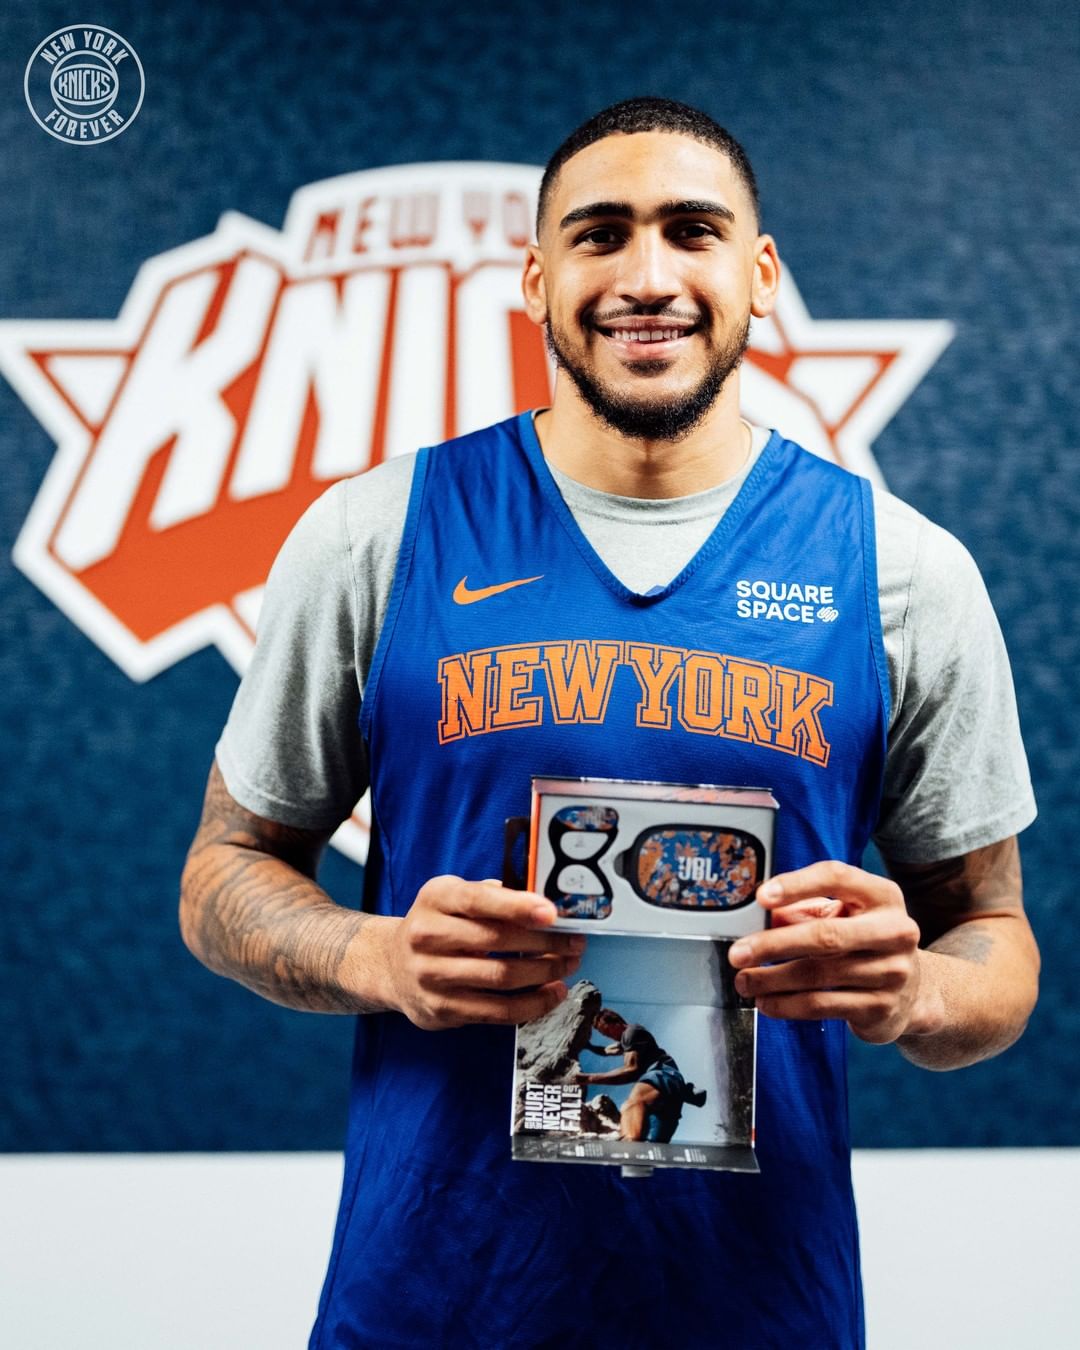 Shout-out to @jblaudio for the special delivery! #TeamJBL x #NewYorkForever...